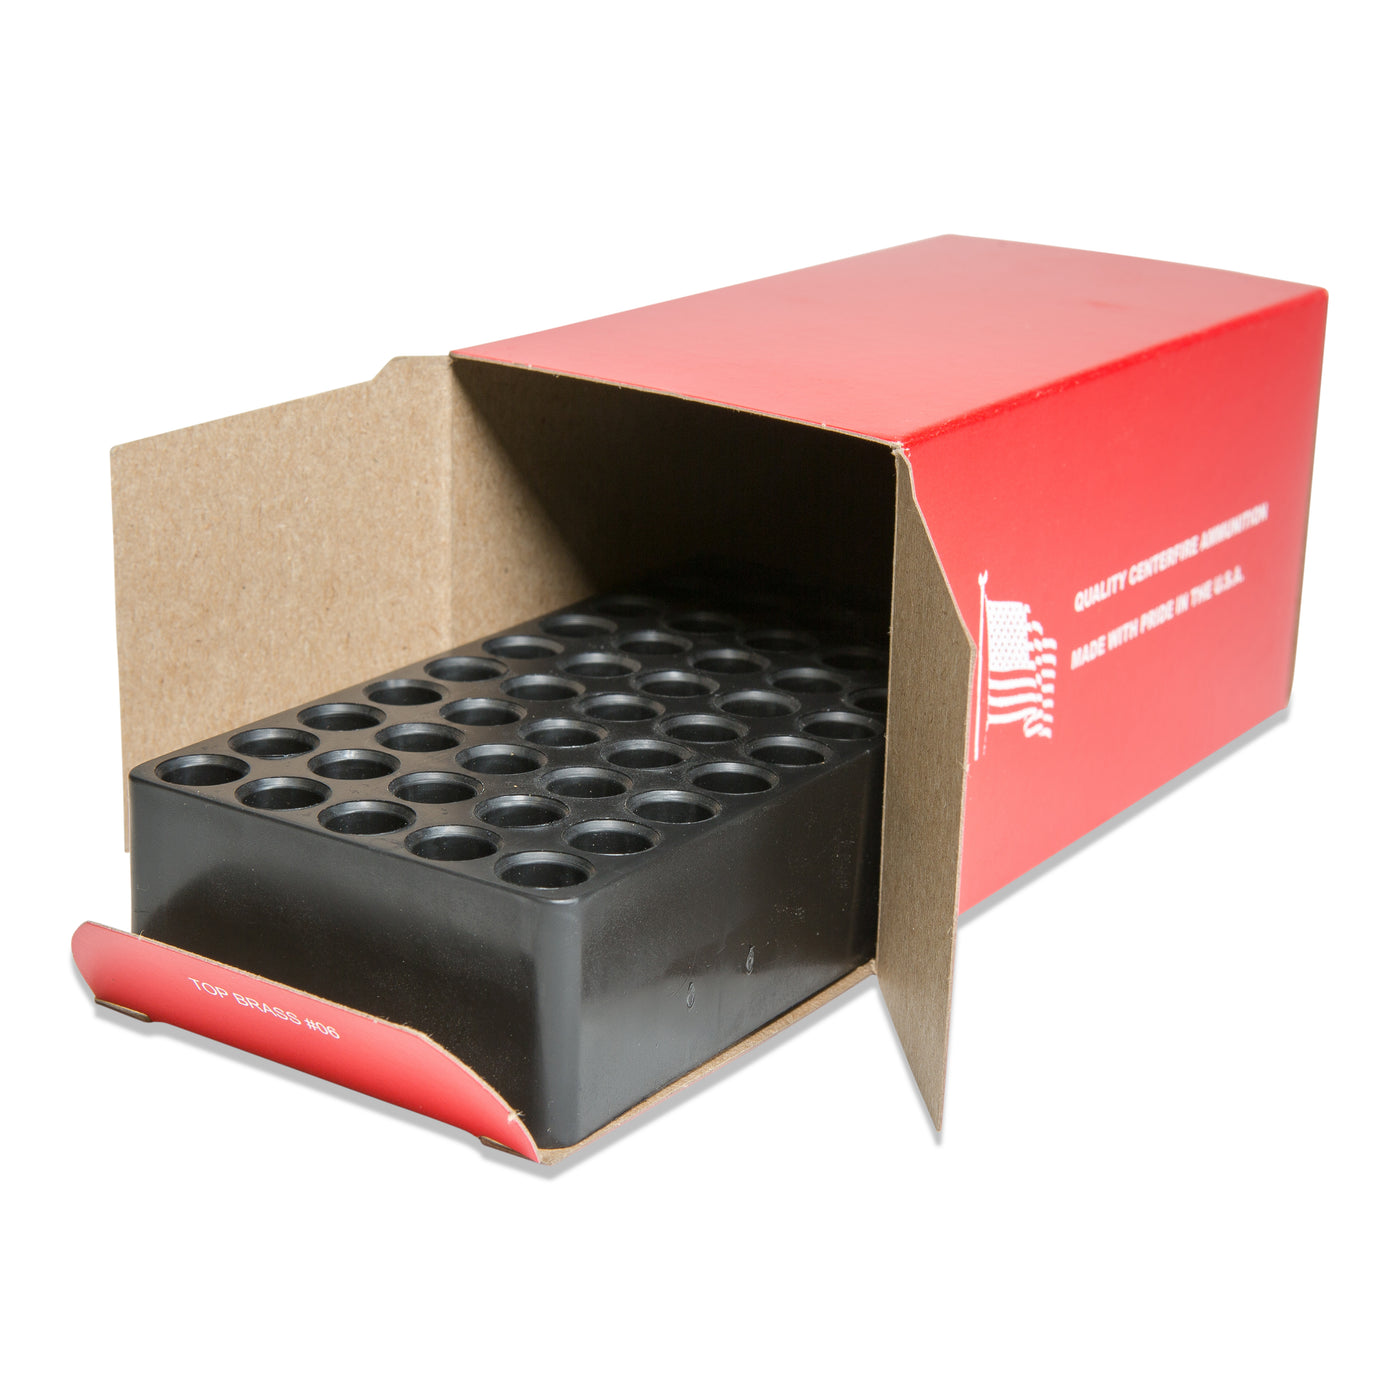 06 Ammunition Packaging Box & Tray Combos for .223 / .222 / .300